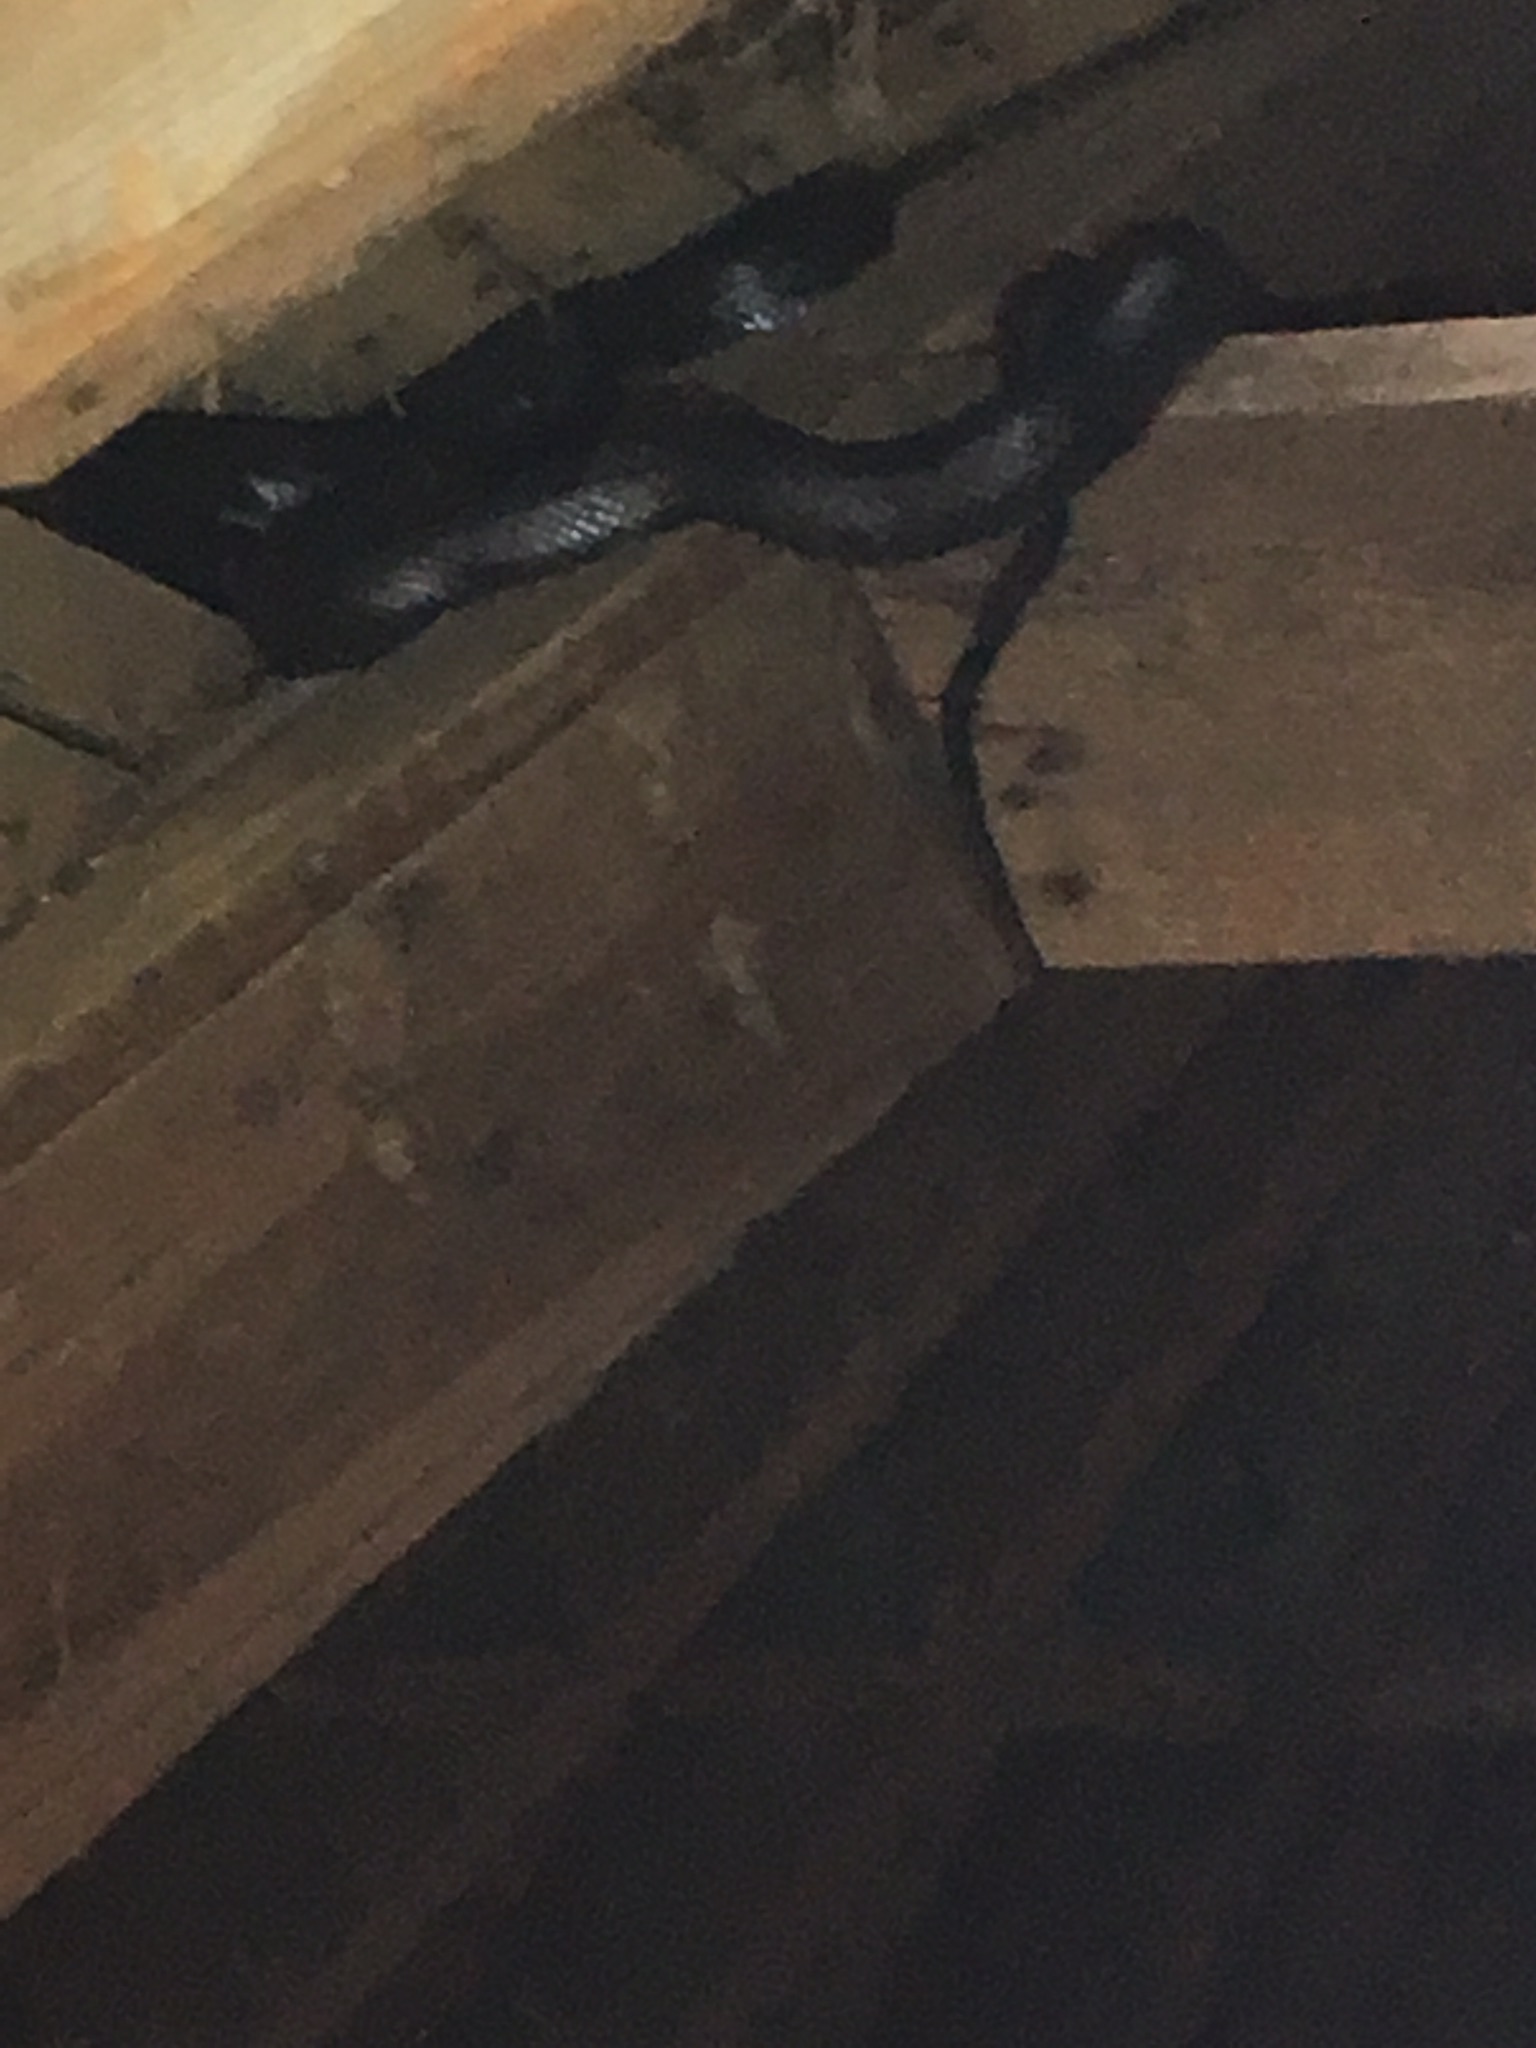 snake in crawlspace